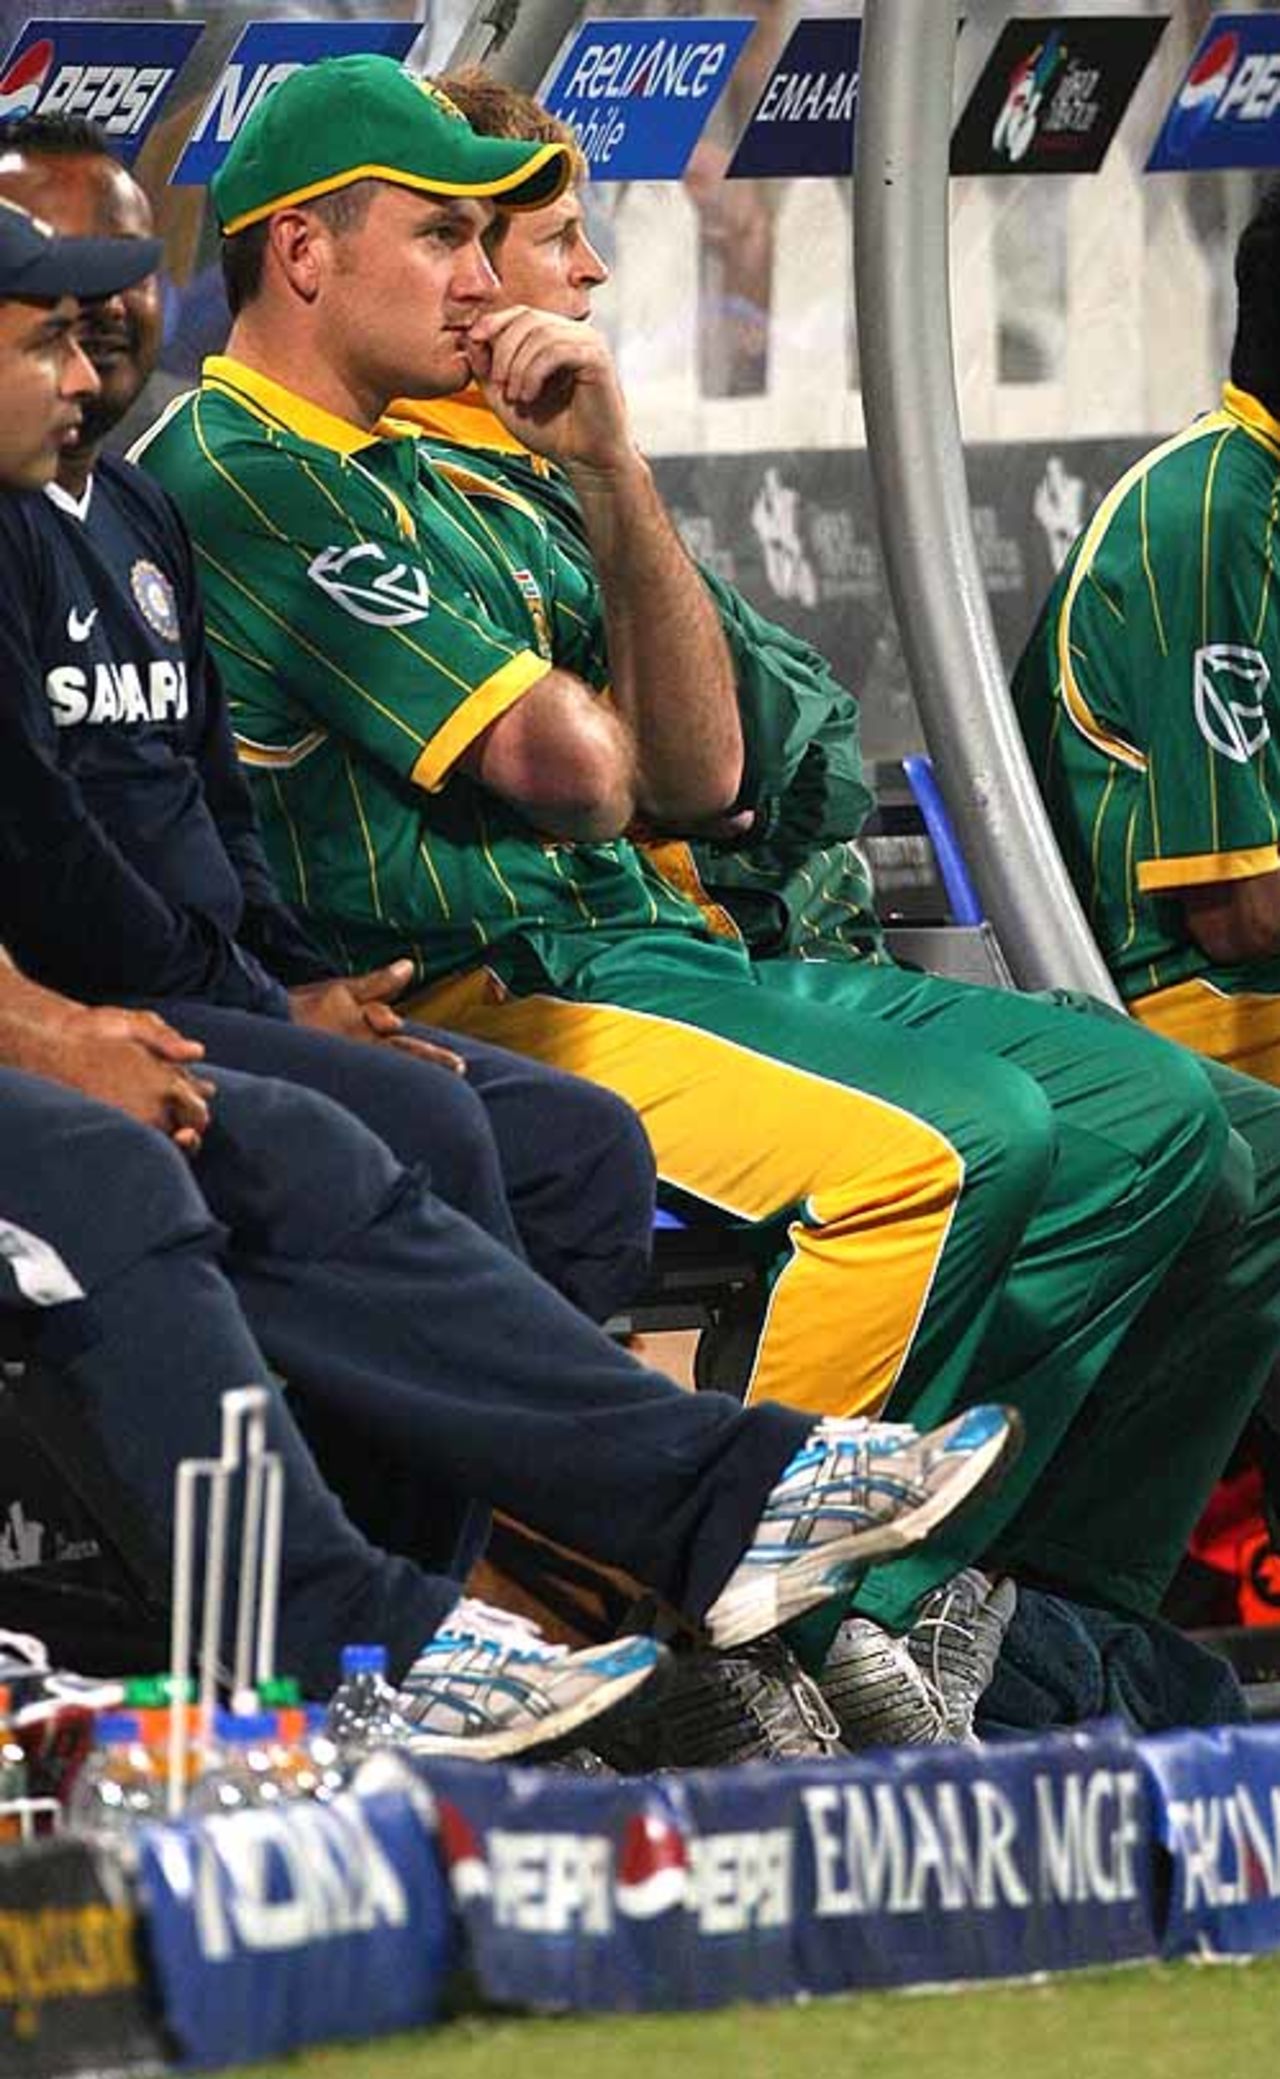 Graeme Smith watches proceedings from the dugout, India v South Africa, Group E, ICC World Twenty20, Durban, September 20, 2007